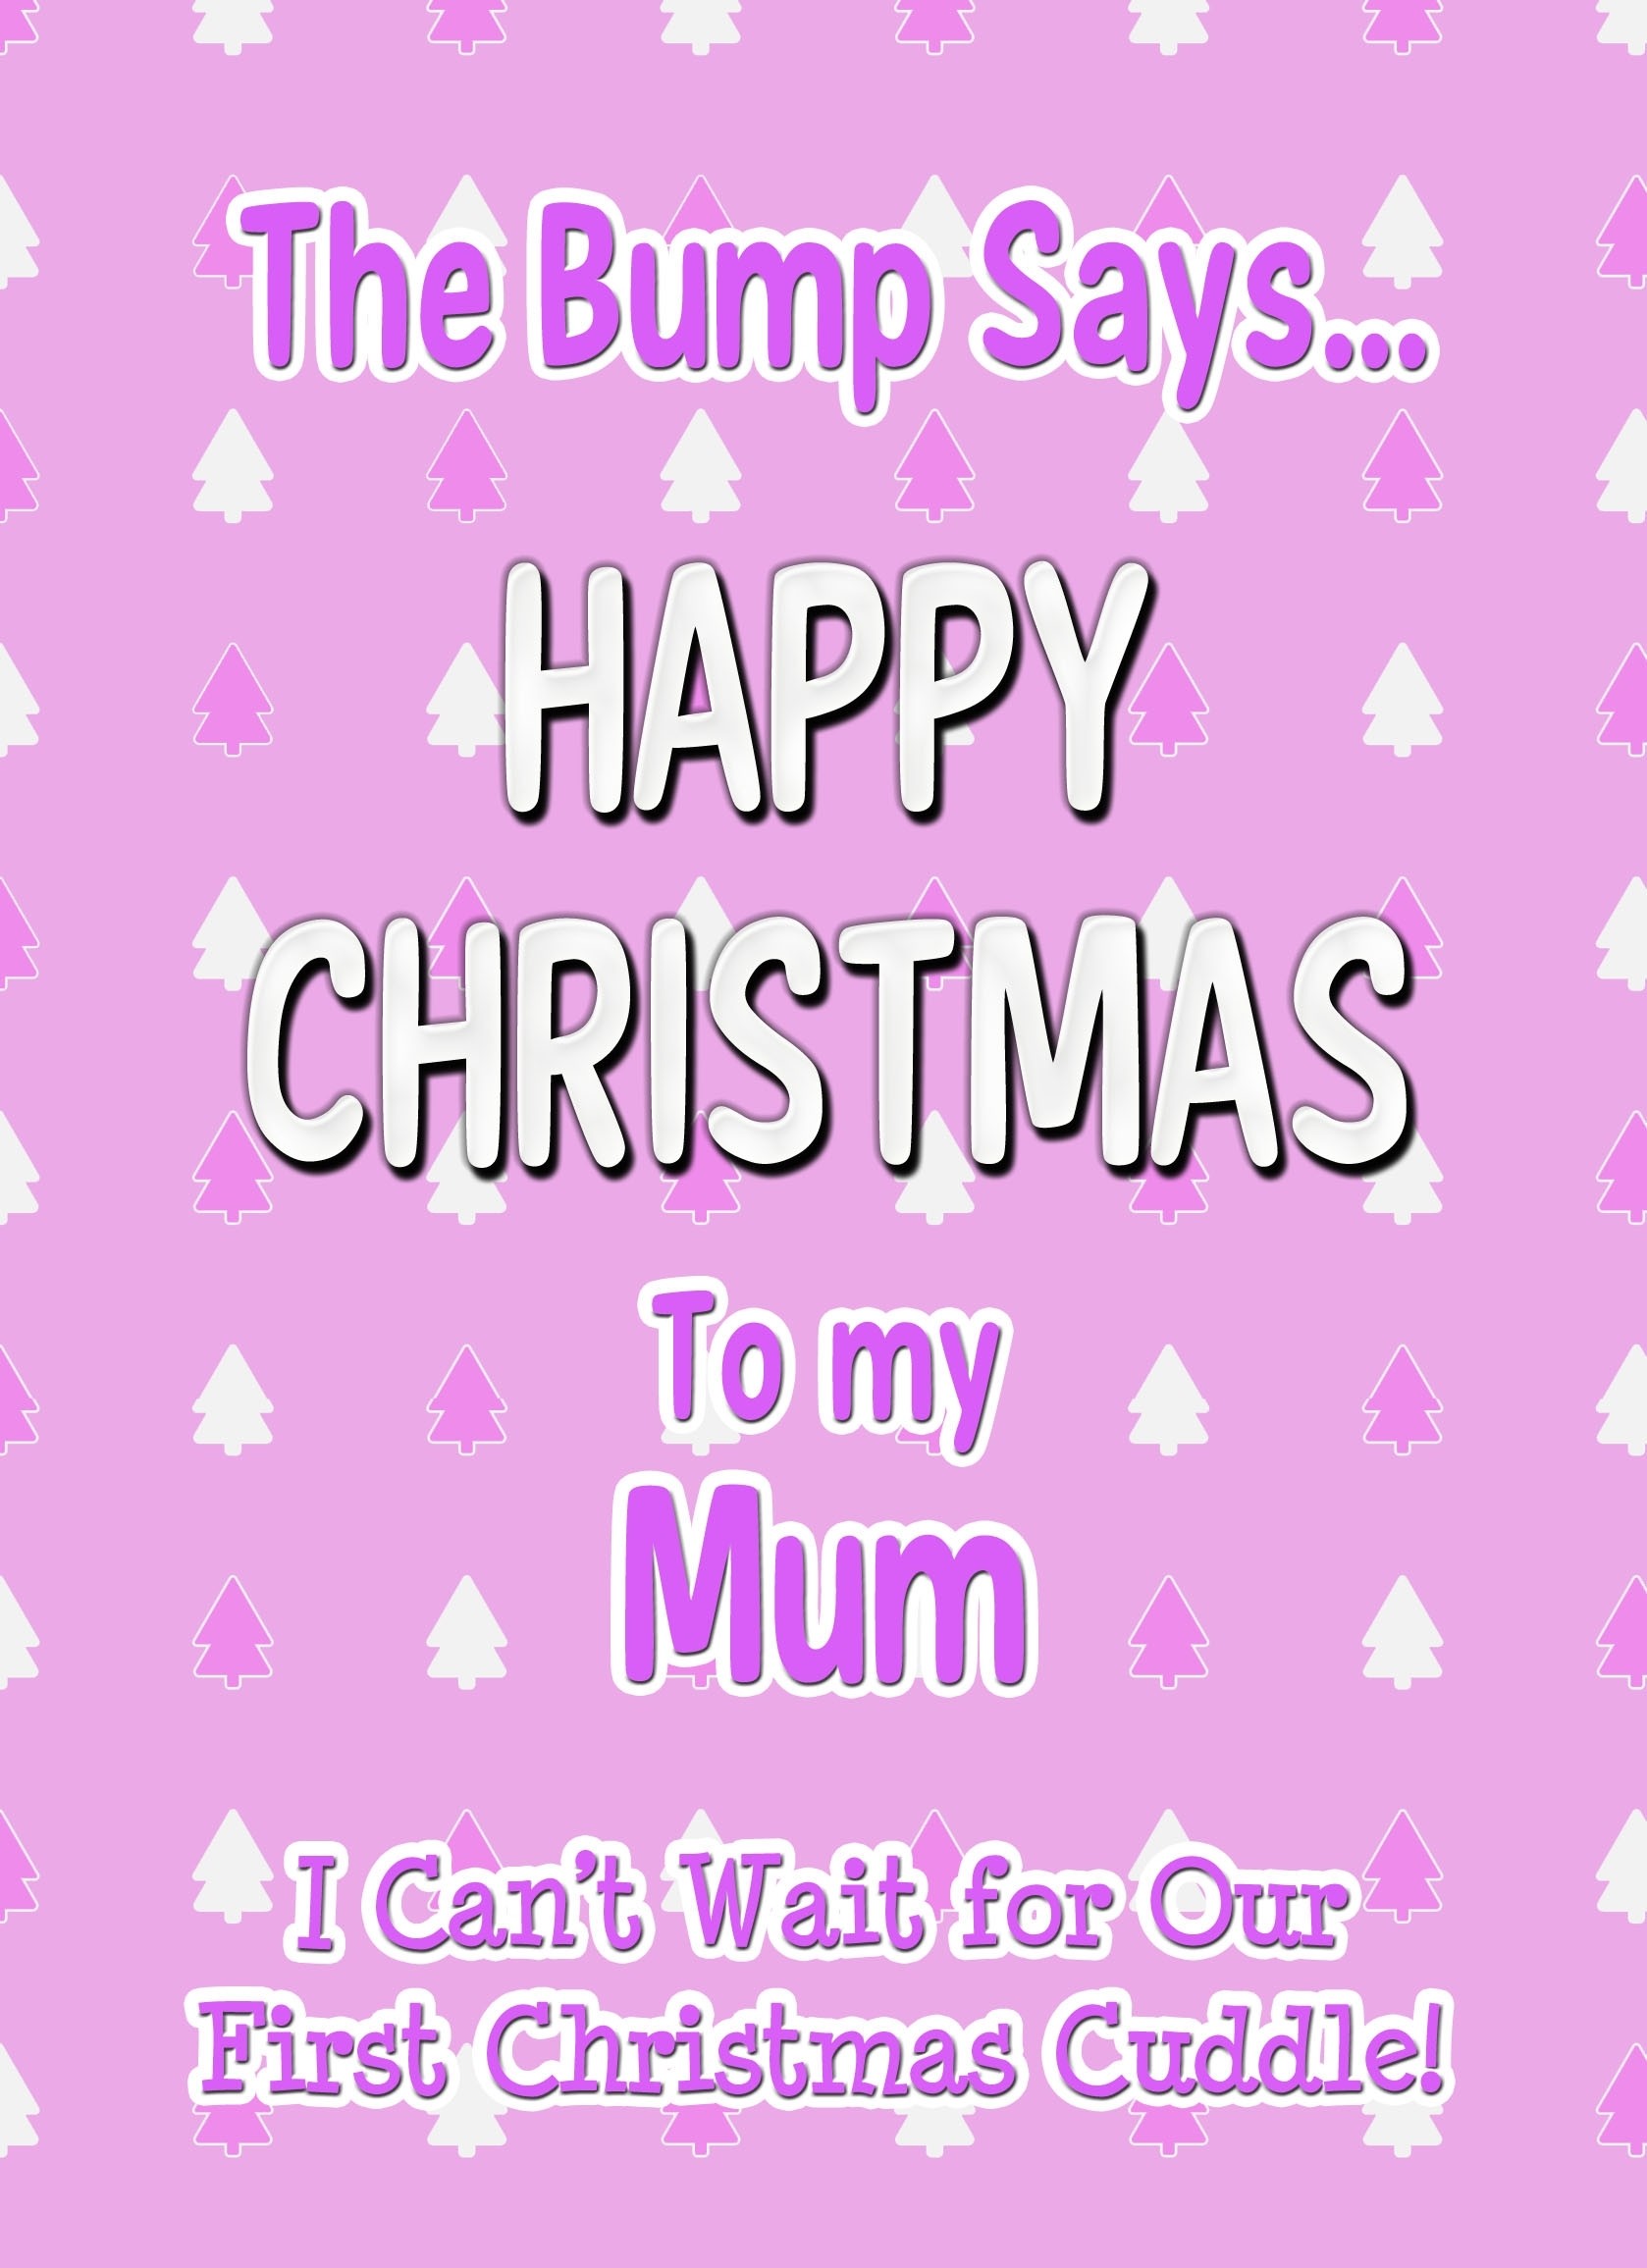 From The Bump Pregnancy Christmas Card (Mum, Pink)